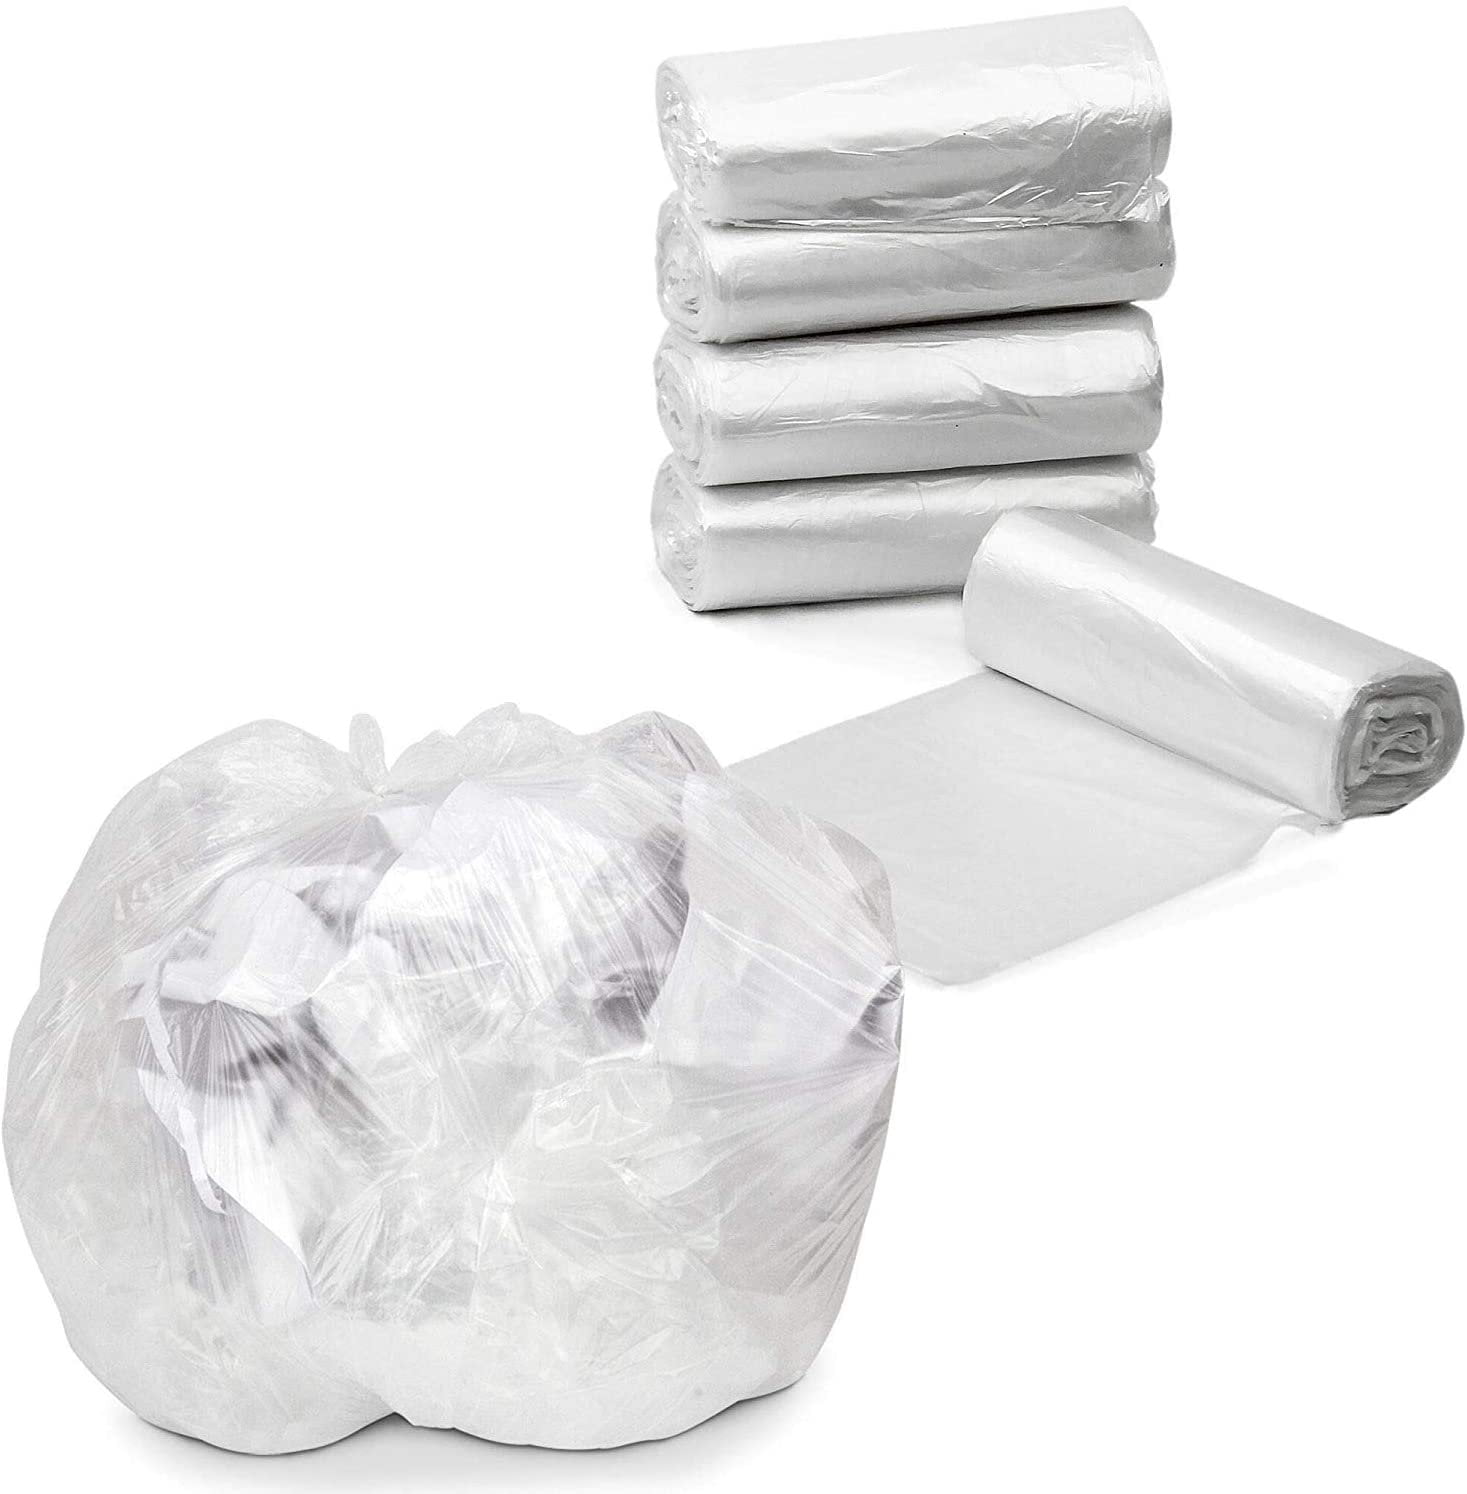 12-16 Gallon Clear Garbage Bags Long Island - 631-524-5444